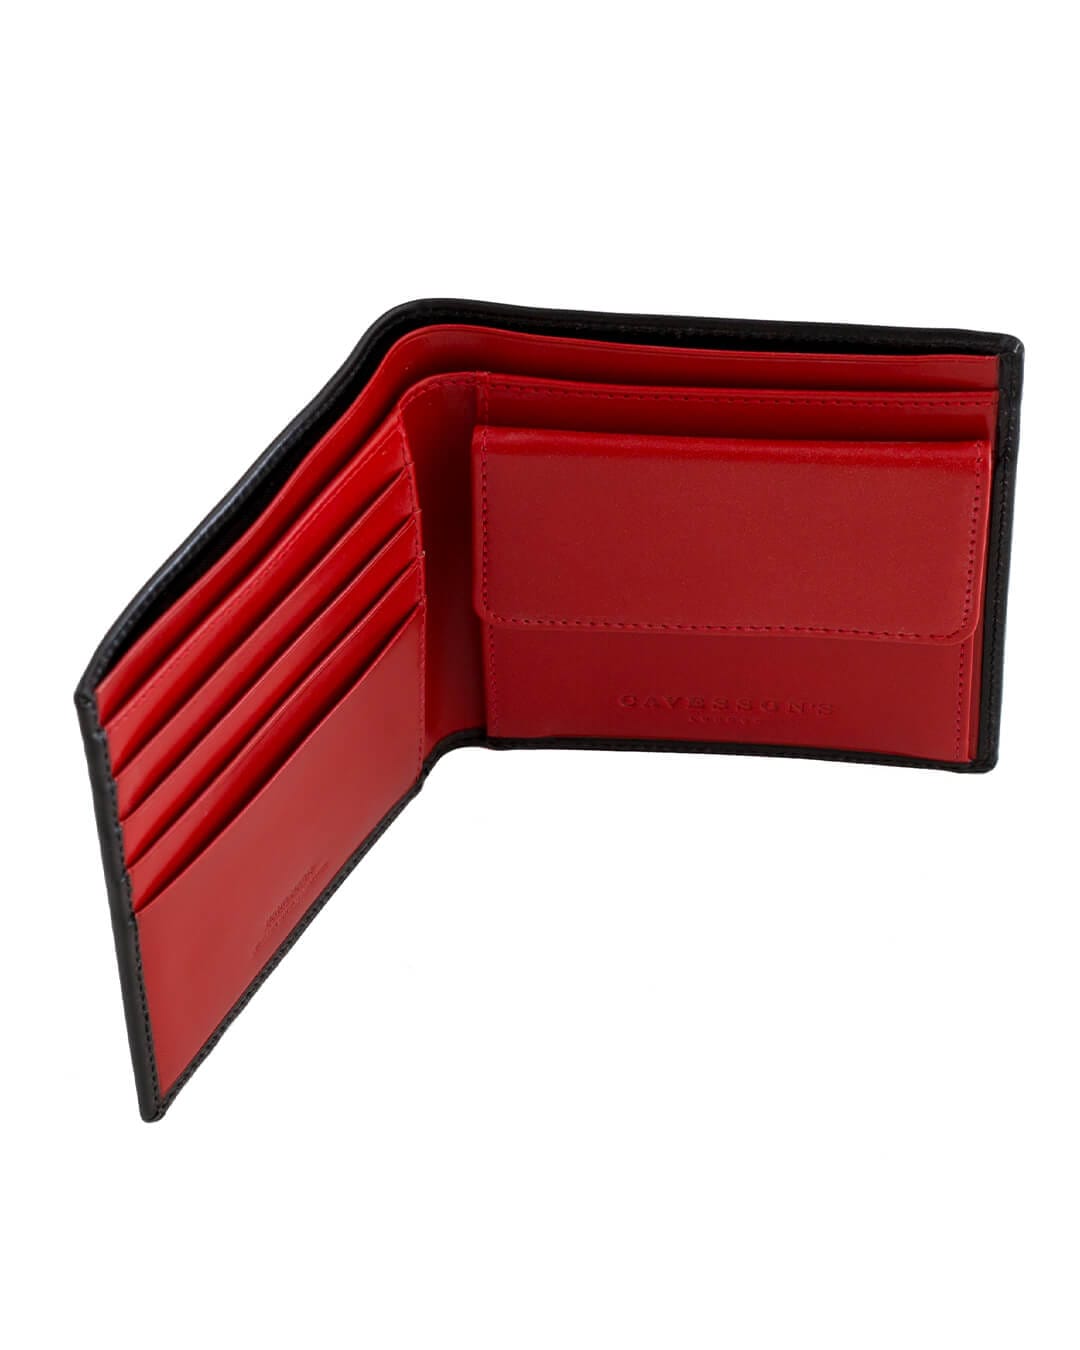 Cavesson&#39;s Wallets Cavesson&#39;s Black And Red Coin Wallet